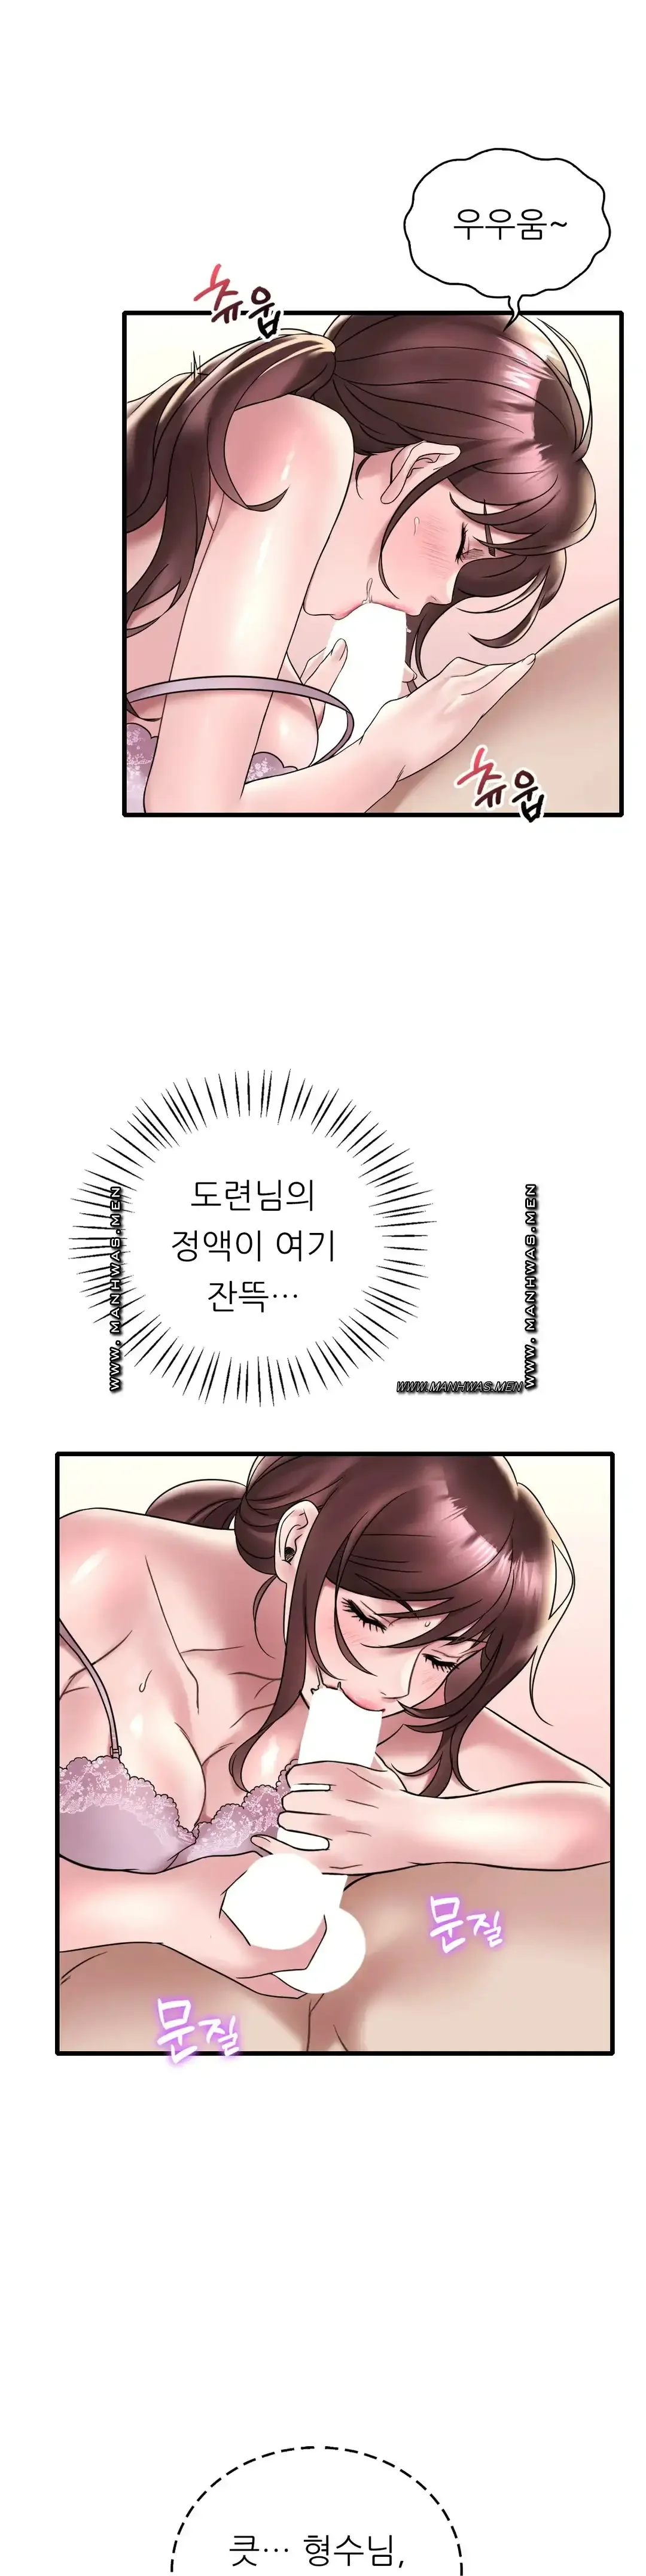 she-wants-to-get-drunk-raw-chap-33-1